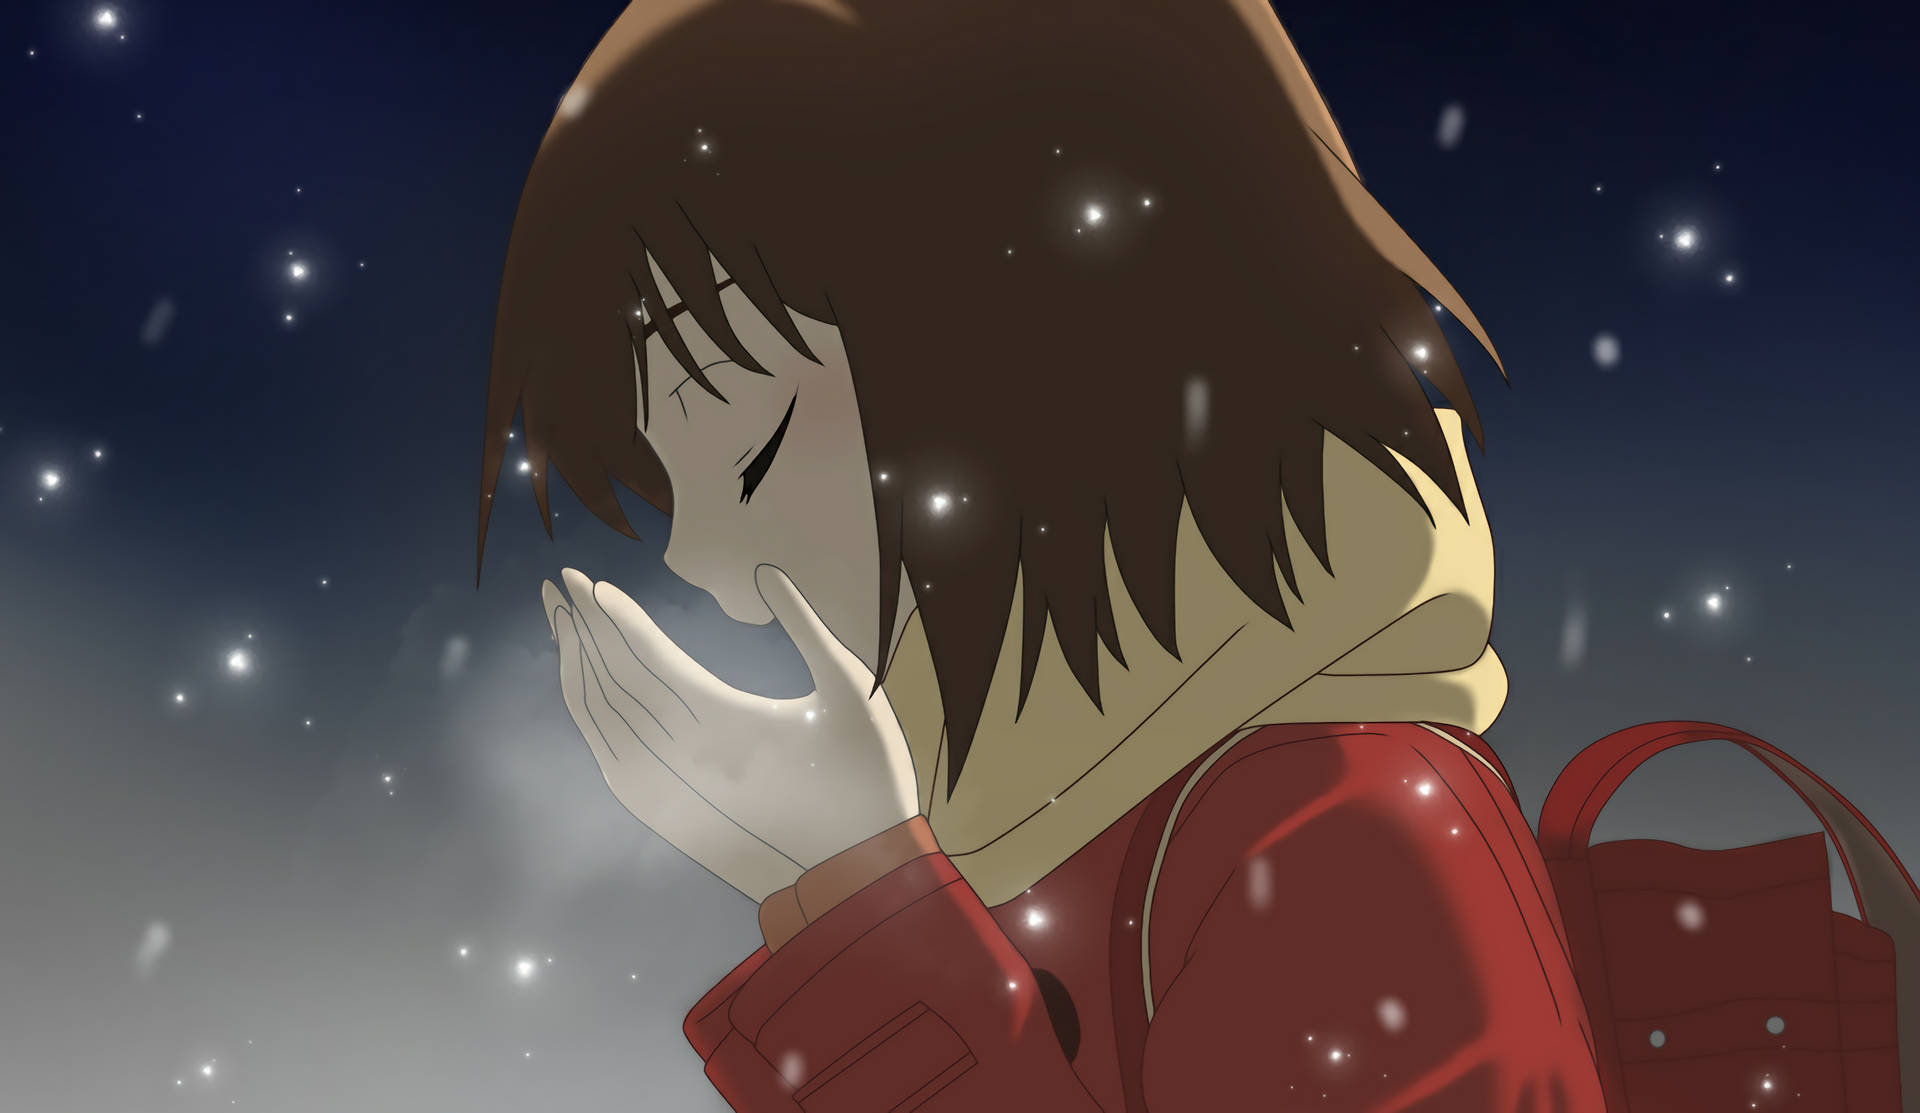 A Starry Night In Erased Background